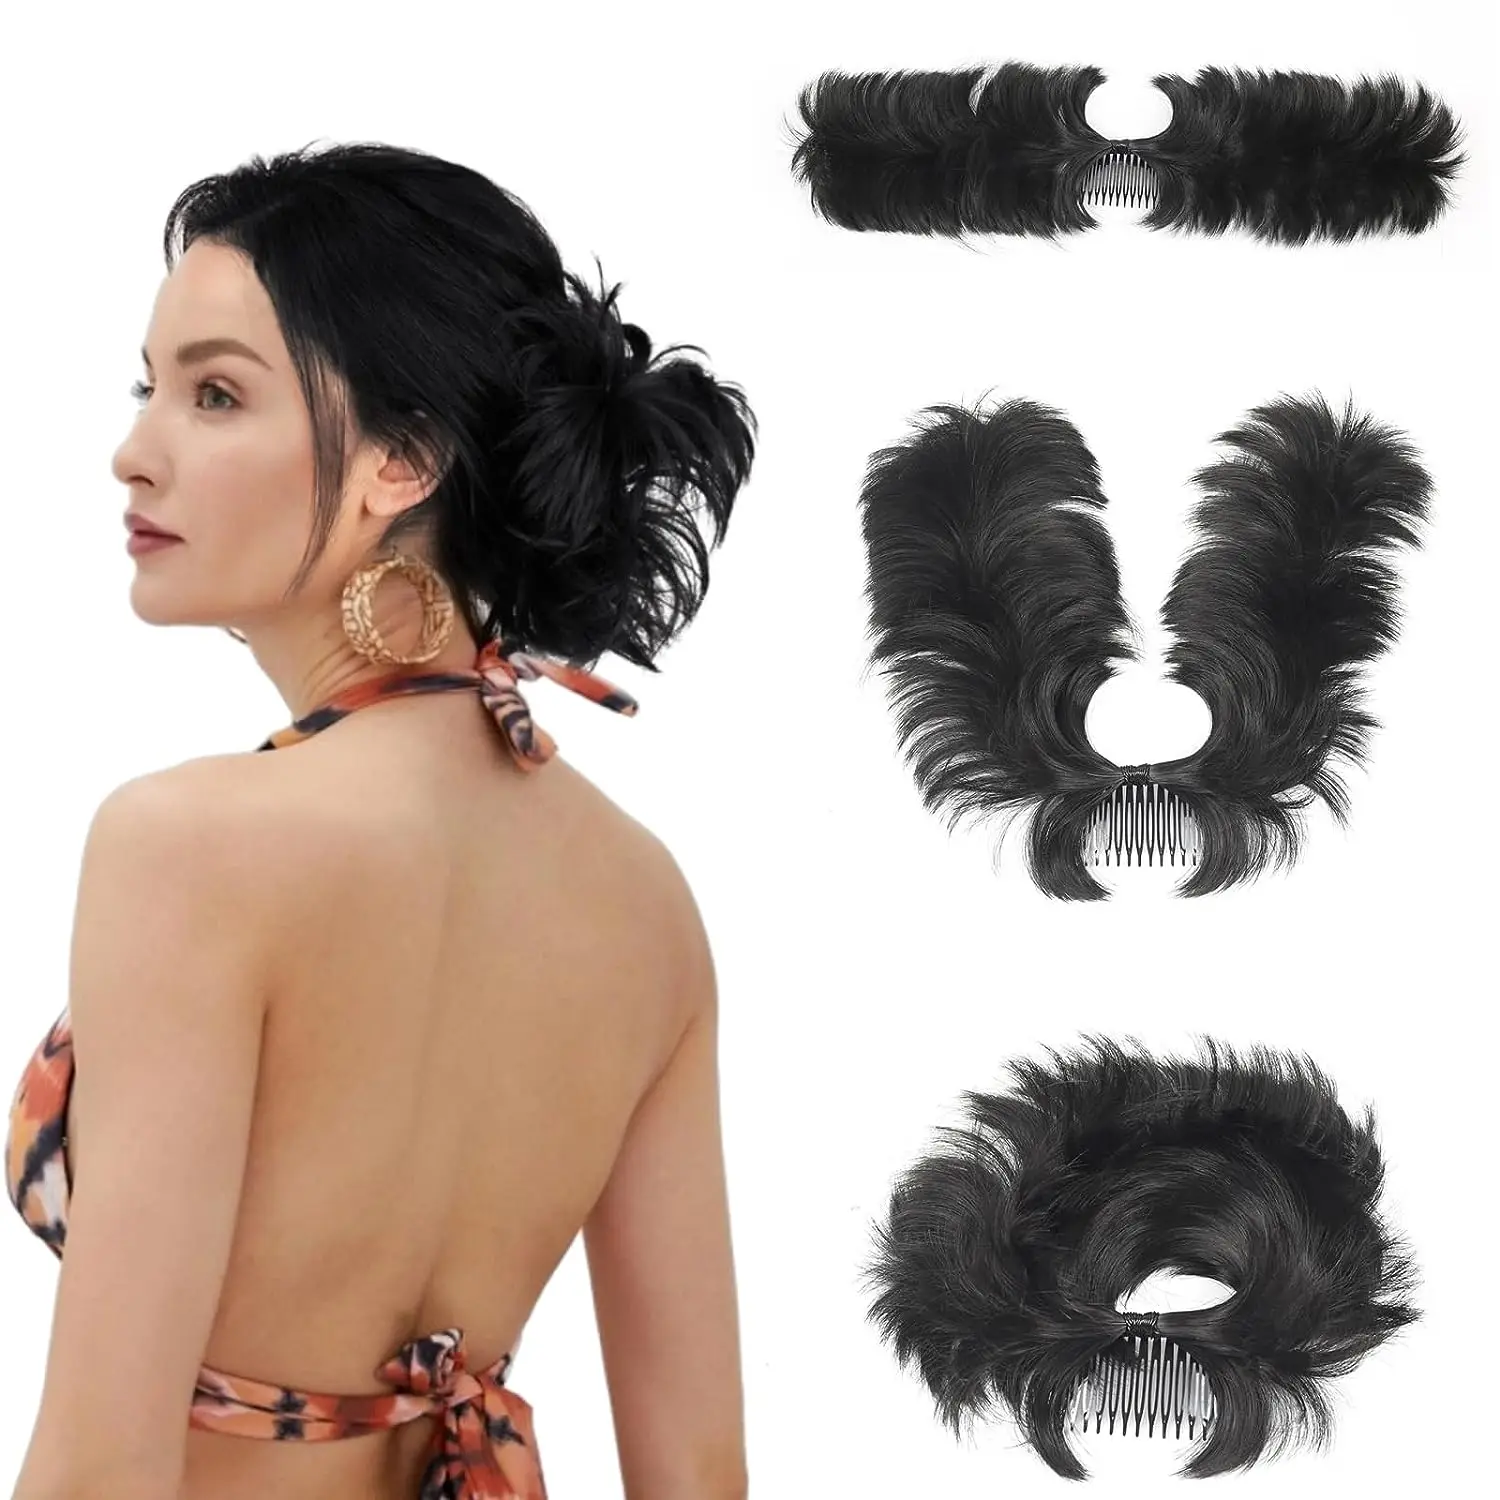 My-Diva  Adjustable Versatile Tousled Messy Bun Hair Piece Side Comb Clip in Hair Bun Tousled Updo Hairpiece for Women Bun